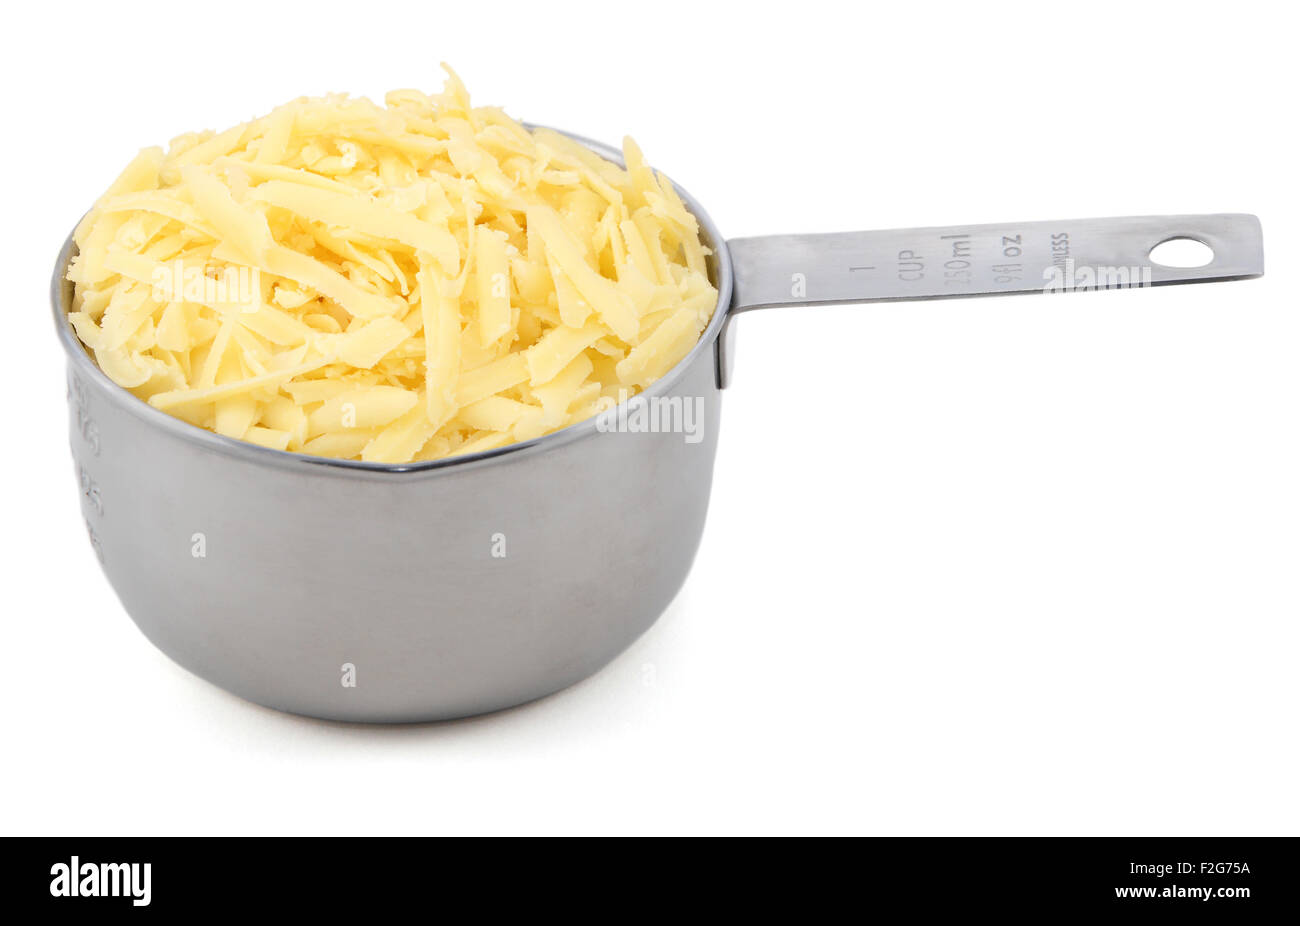 Grated cheese in an American measuring cup, isolated on a white background Stock Photo